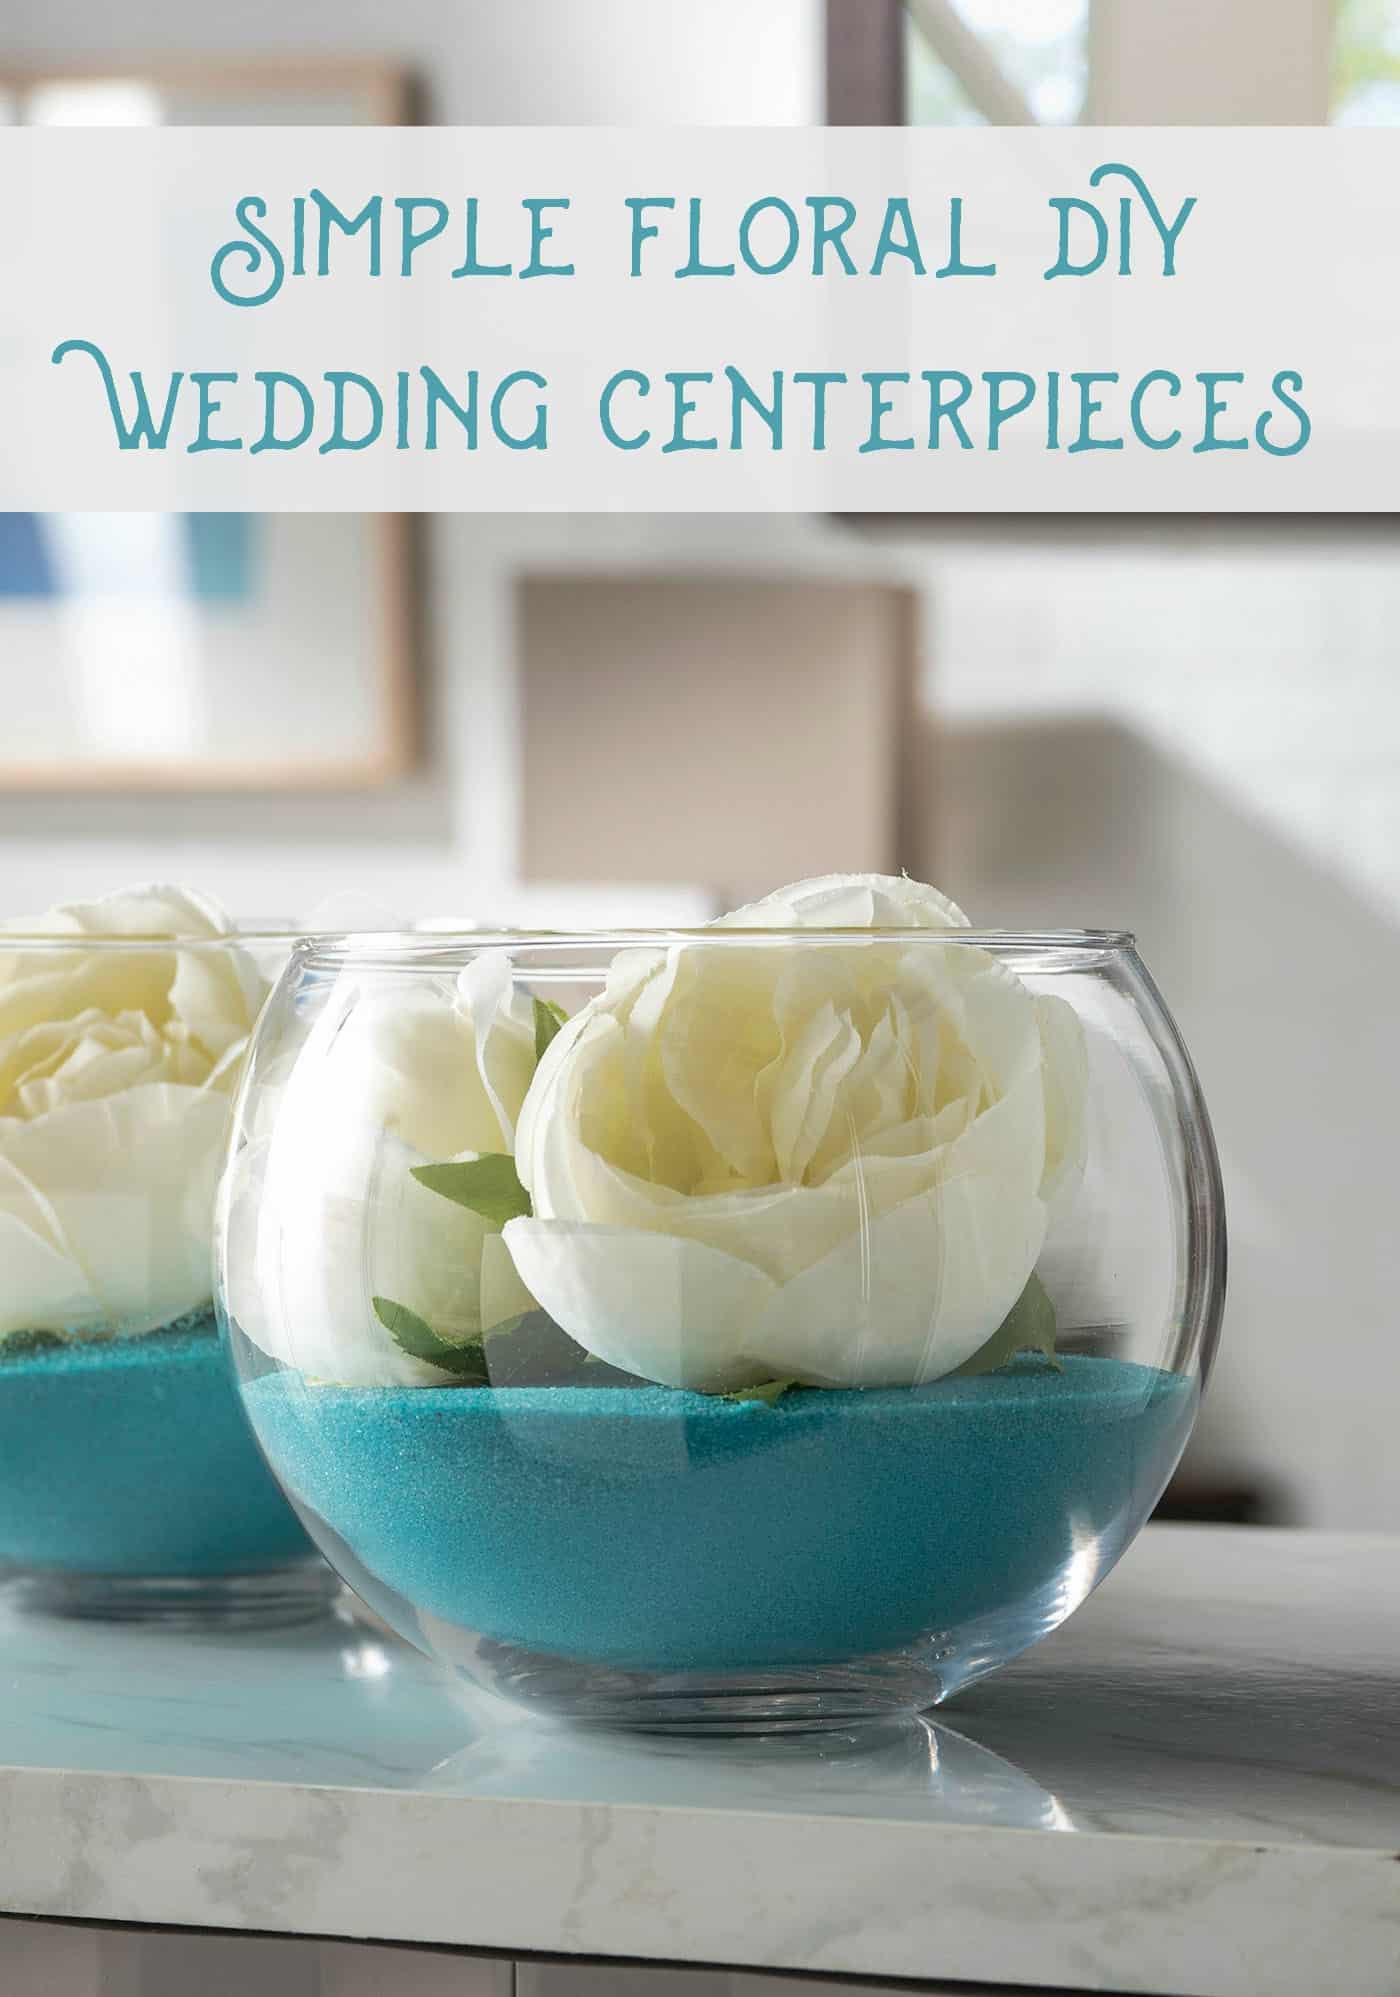 DIY wedding centerpieces using sand and faux flowers